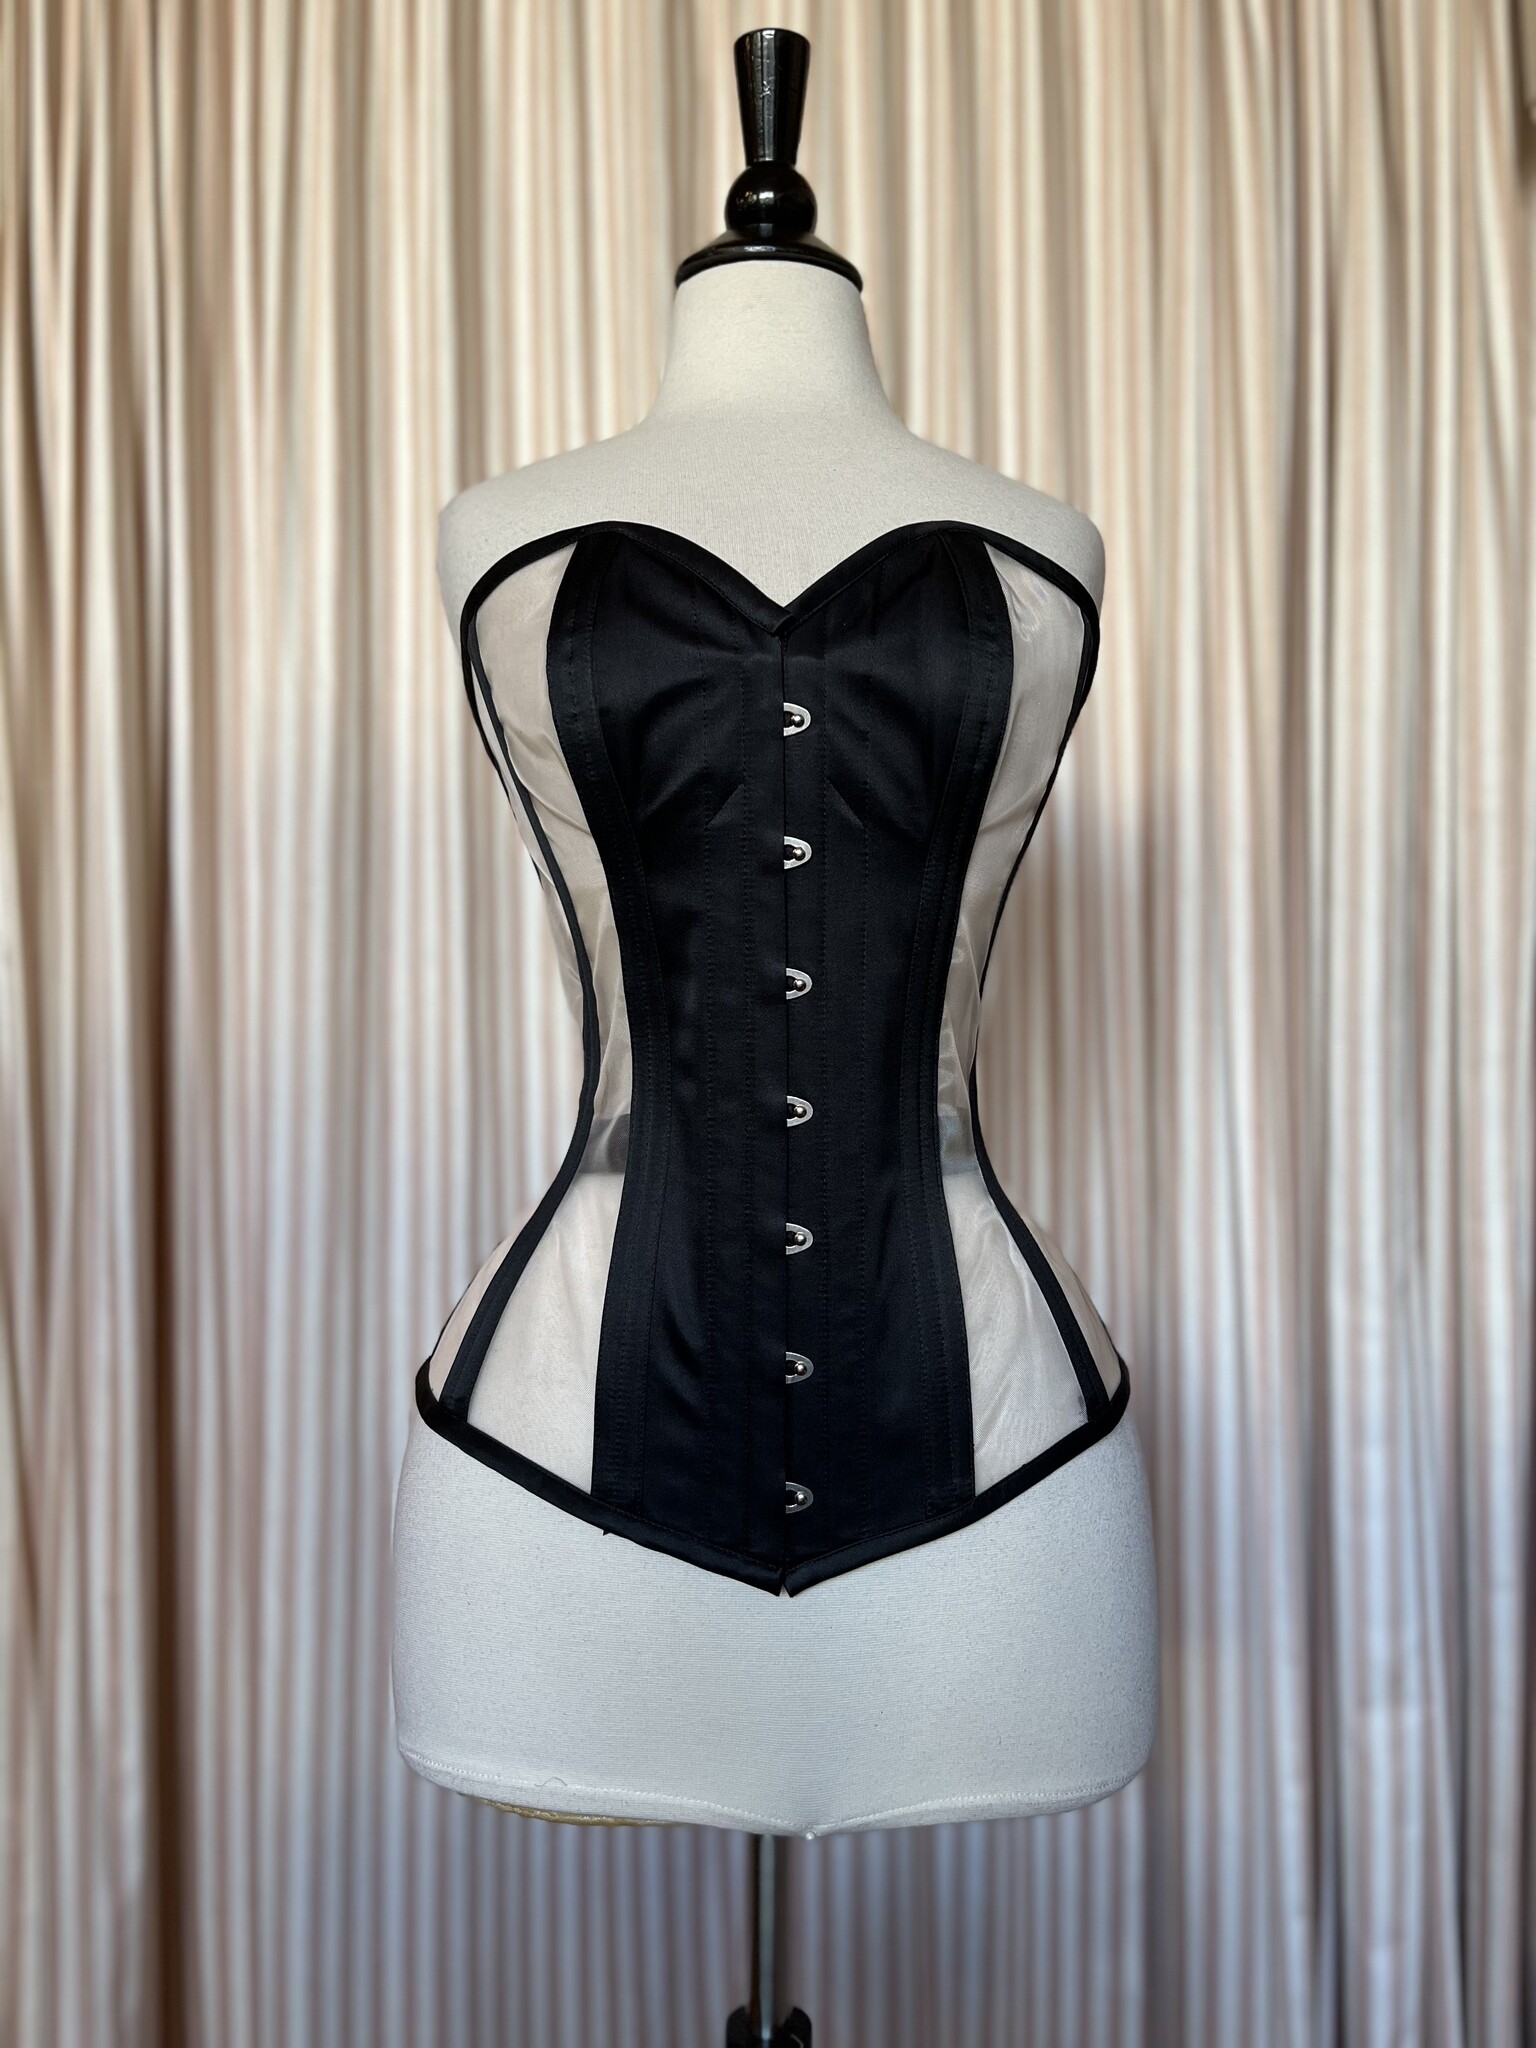 Limited Edition Black Satin with Blush Mesh Risque Valentine 22-1